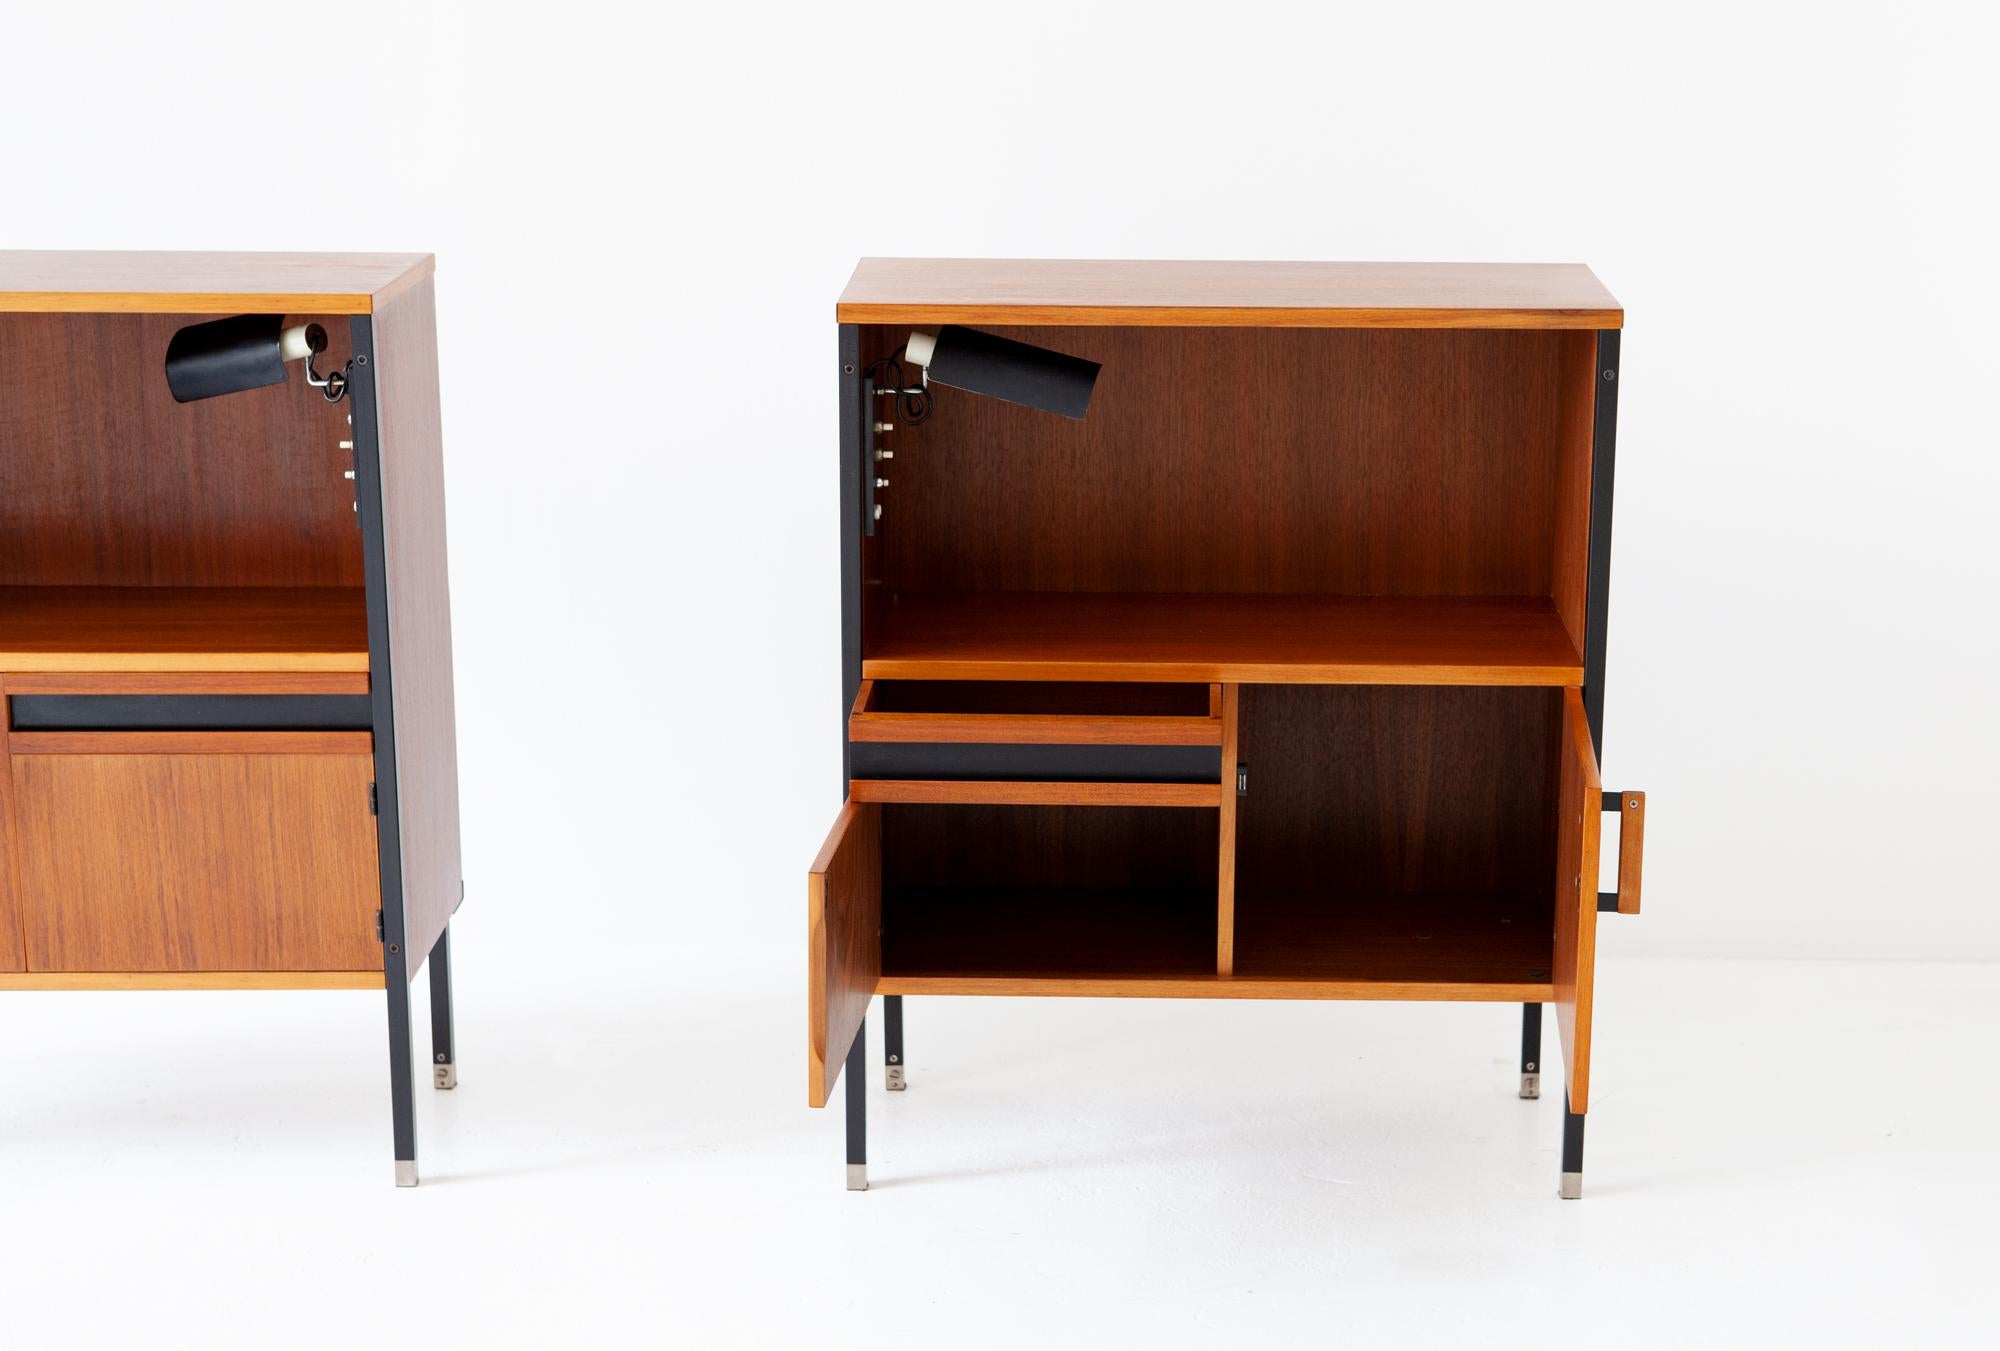 Mid-20th Century Restored Nightstands by Ico Parisi for MIM with Gino Sarfatti Lamps, 1958